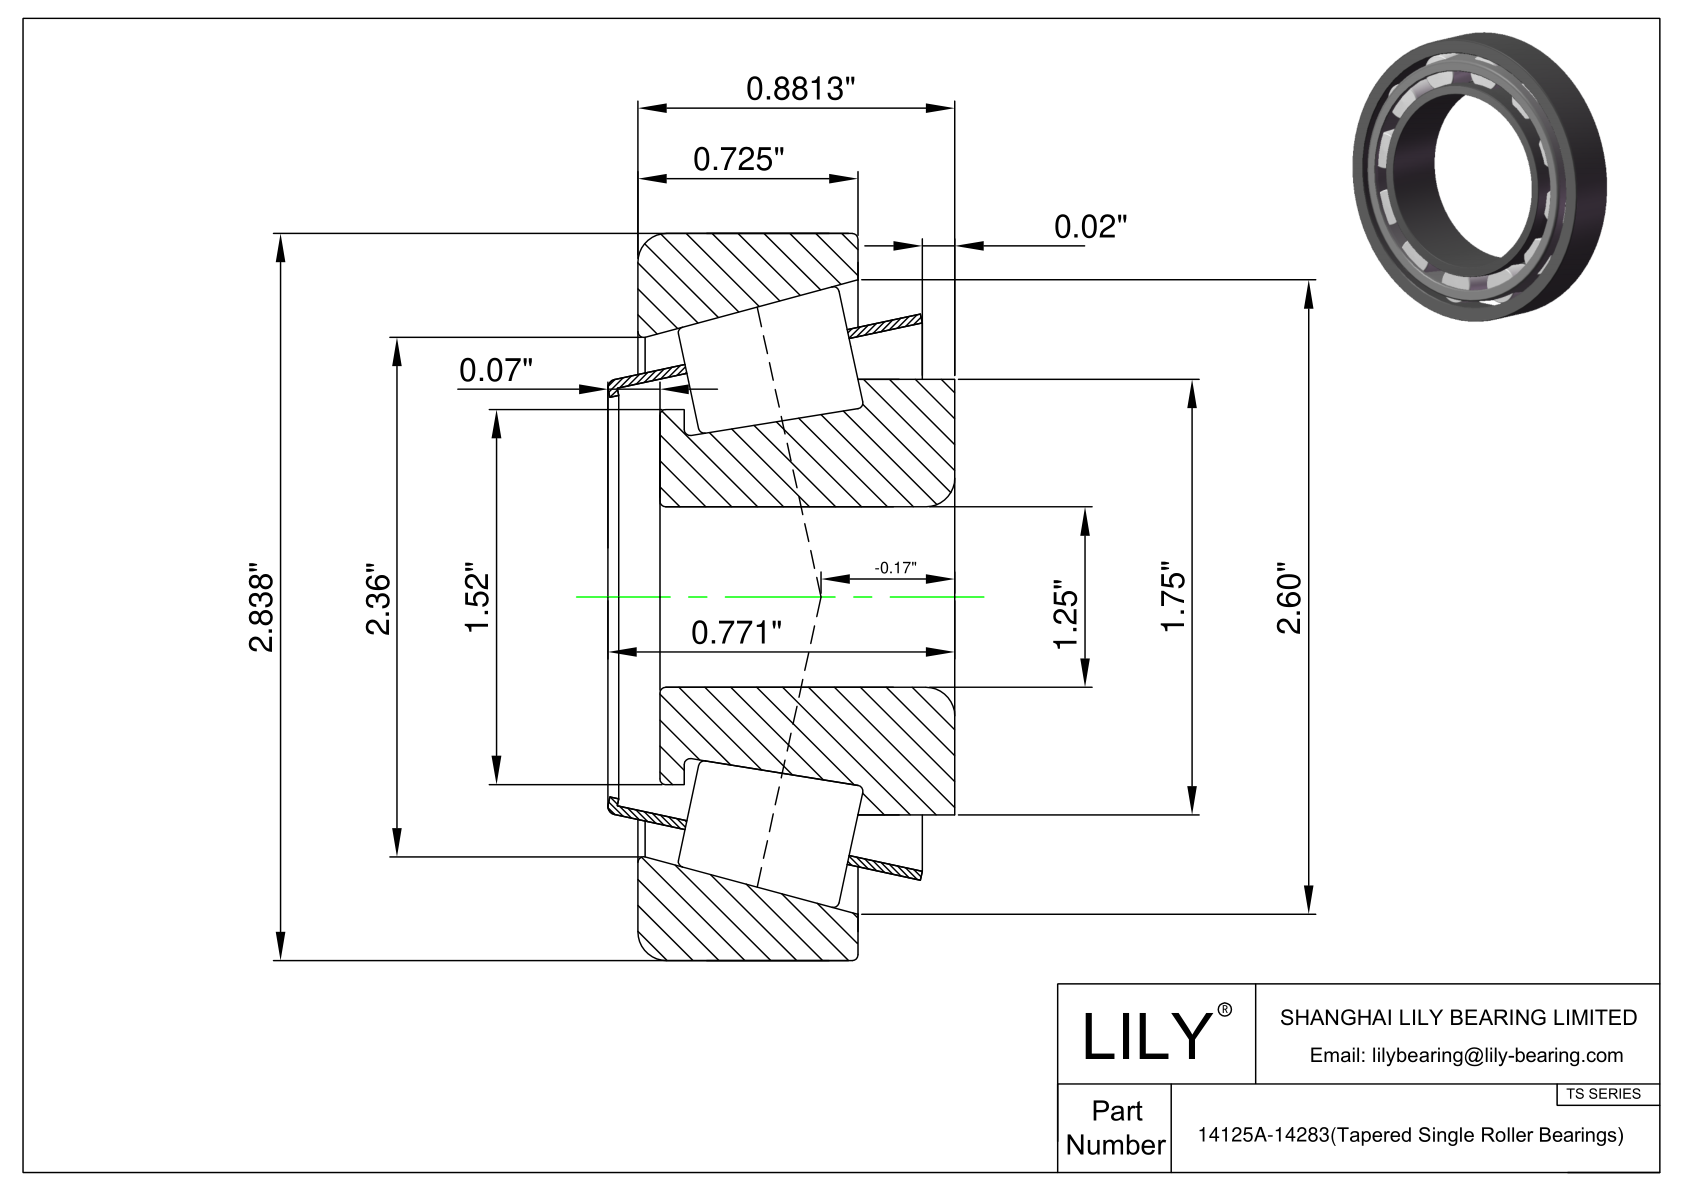 14125A-14283 TS (Tapered Single Roller Bearings) (Imperial) cad drawing